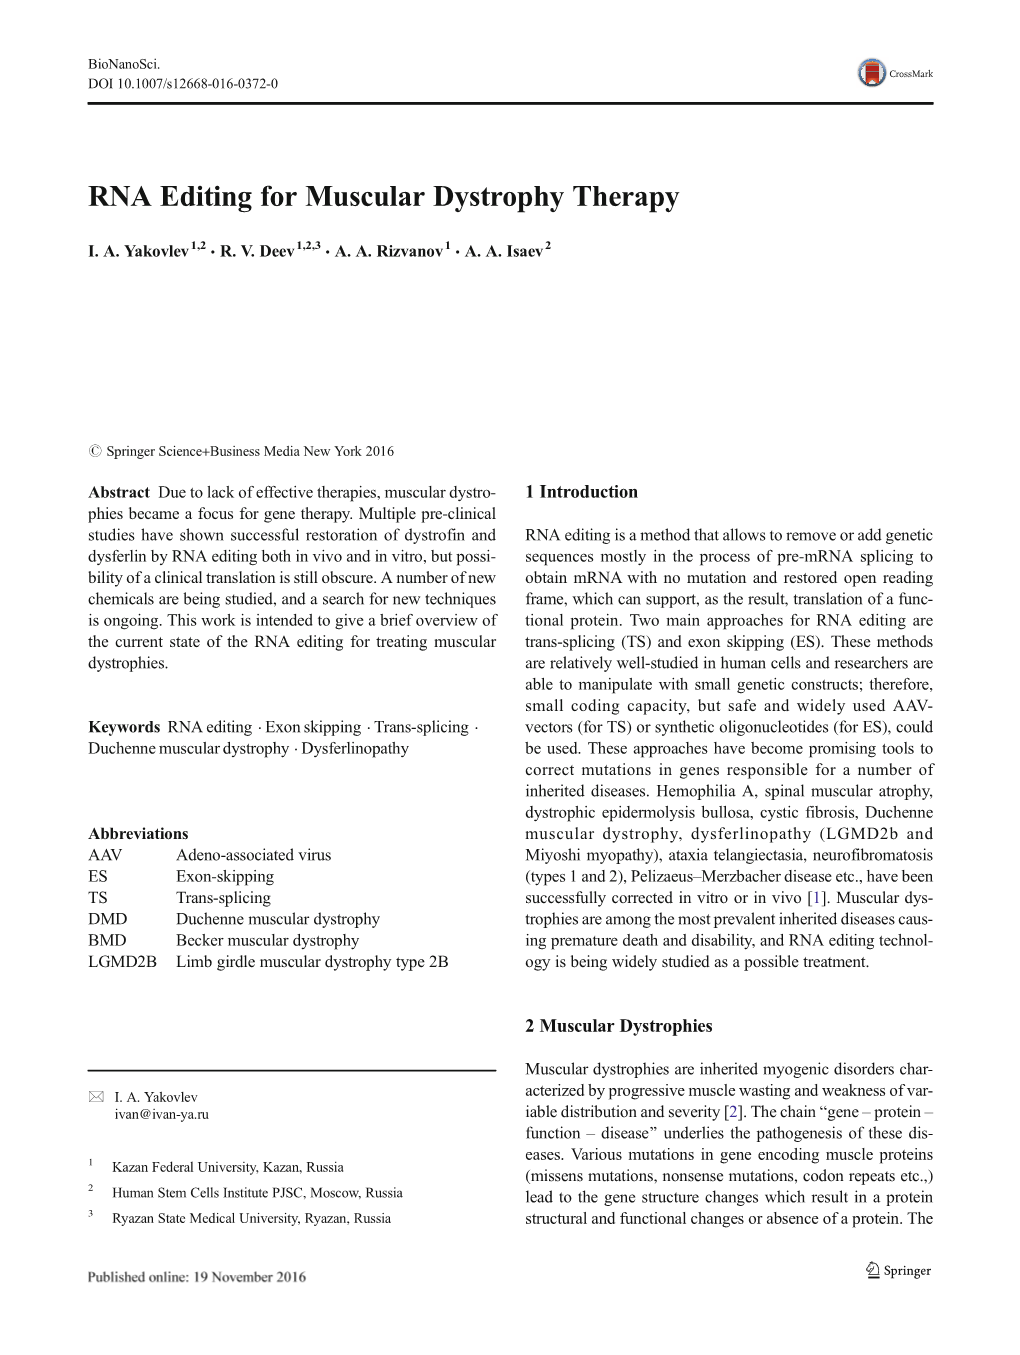 RNA Editing for Muscular Dystrophy Therapy